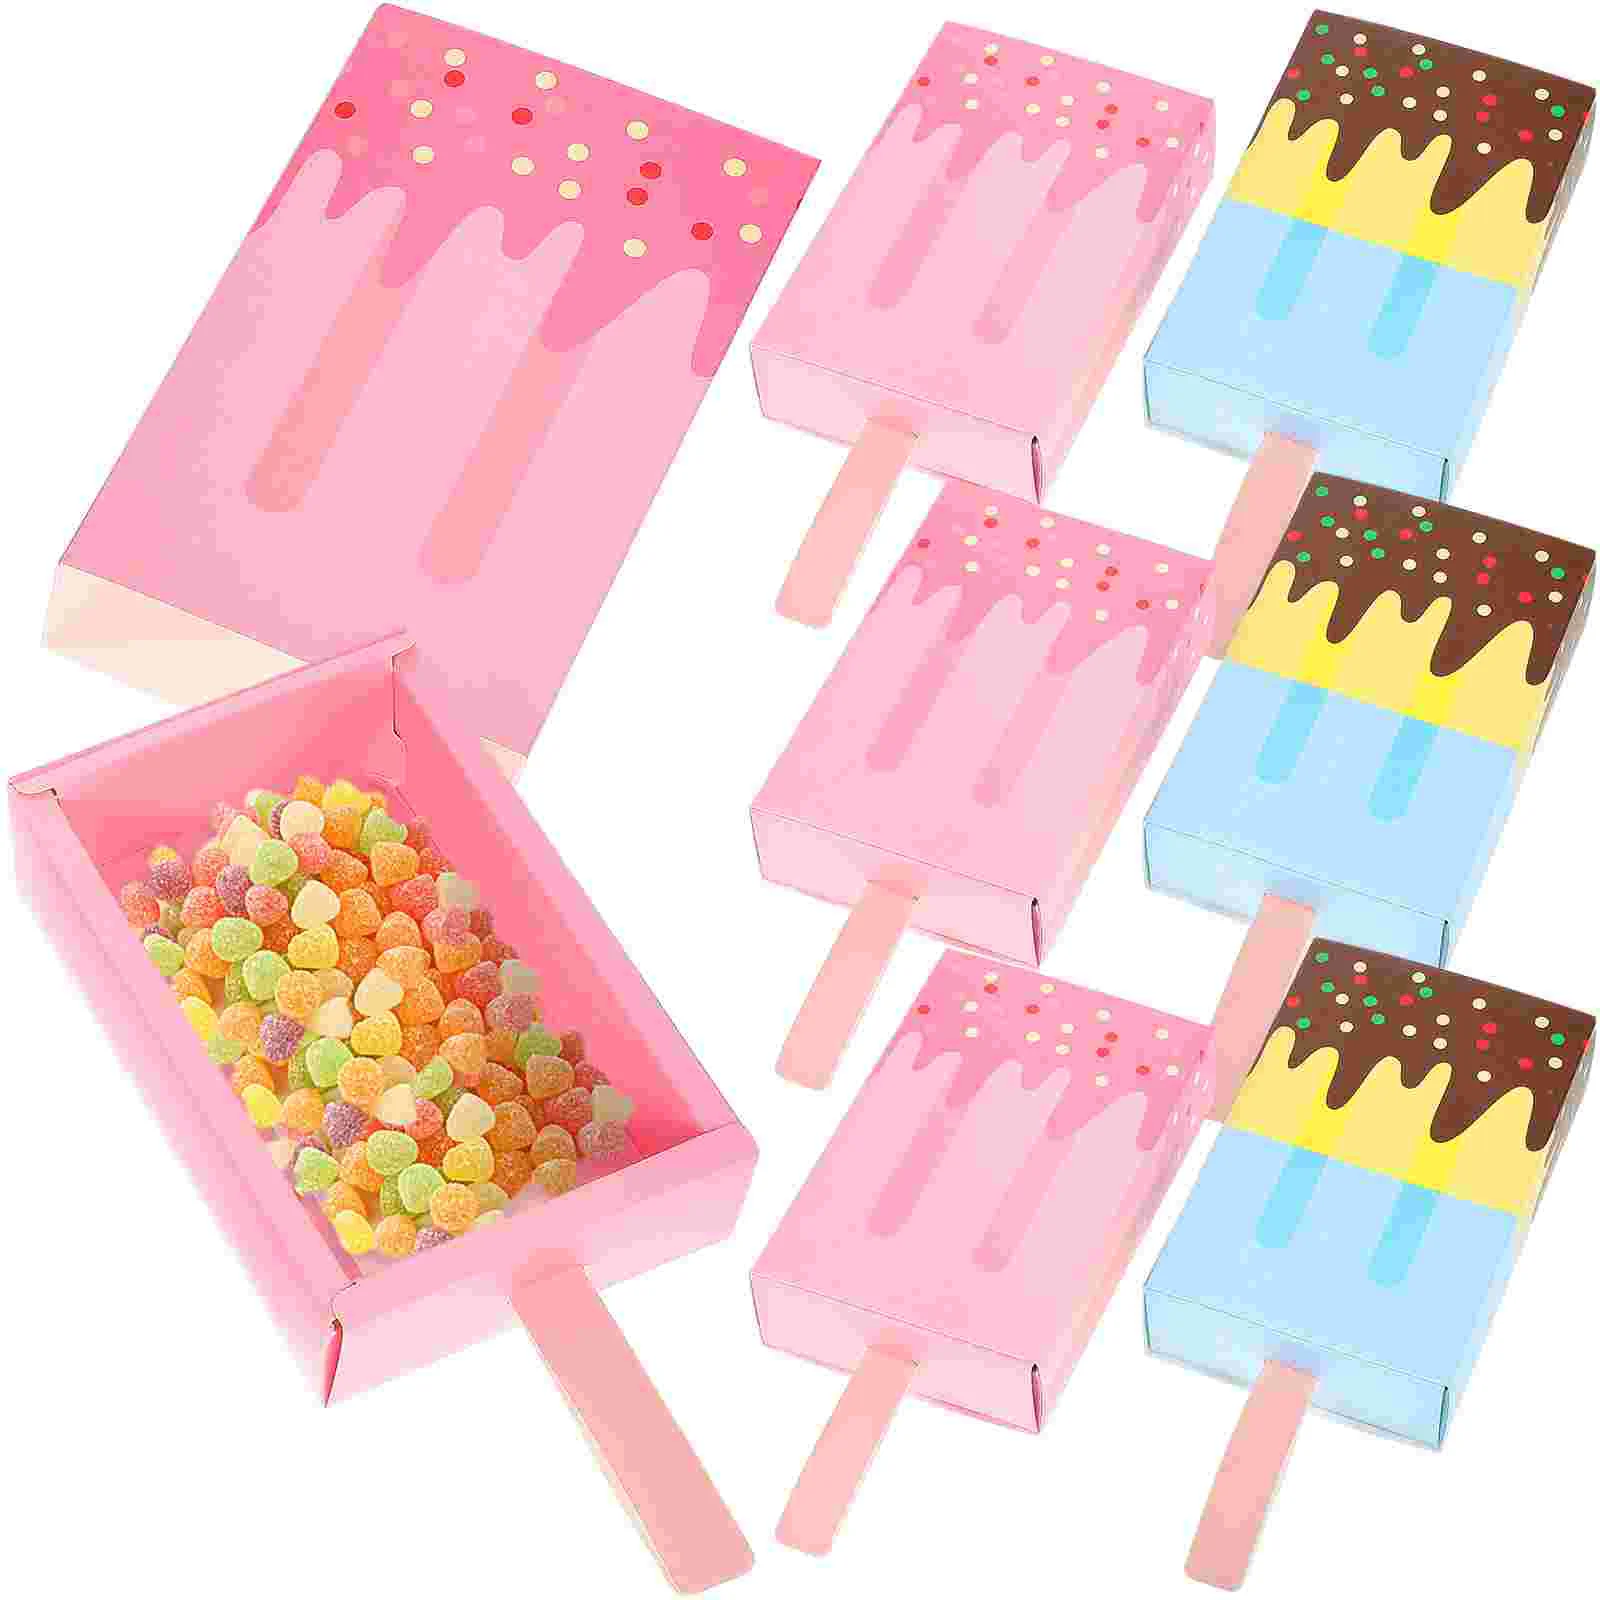 

20 Pcs Candy Boxes Creative Popsicle Shape Treat Boxes Birthday Theme Party Favor Supplies